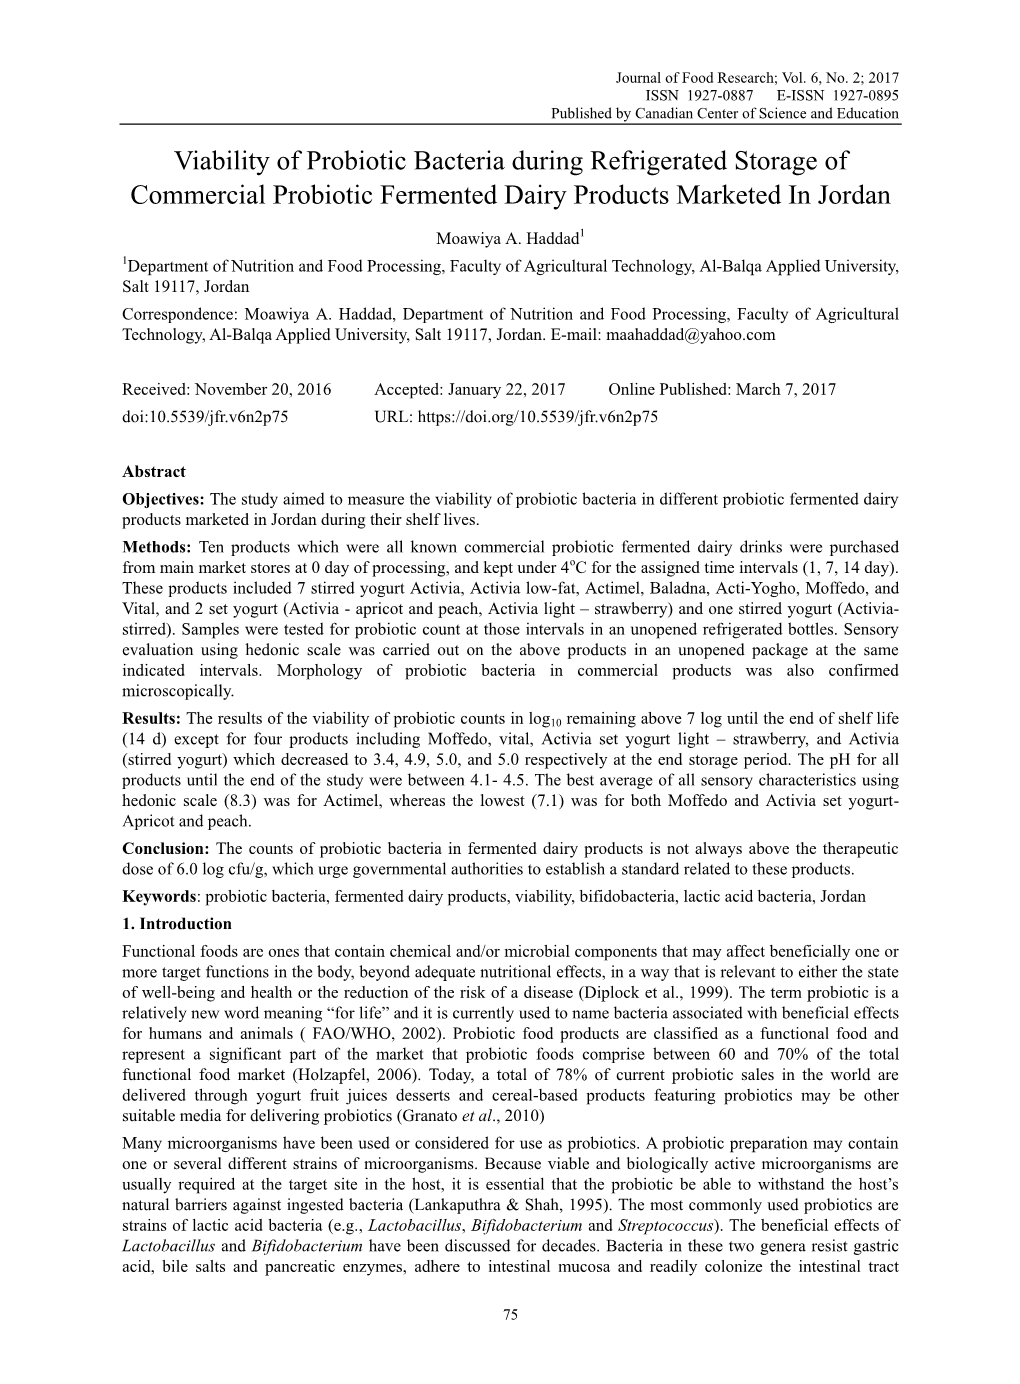 Viability of Probiotic Bacteria During Refrigerated Storage of Commercial Probiotic Fermented Dairy Products Marketed in Jordan